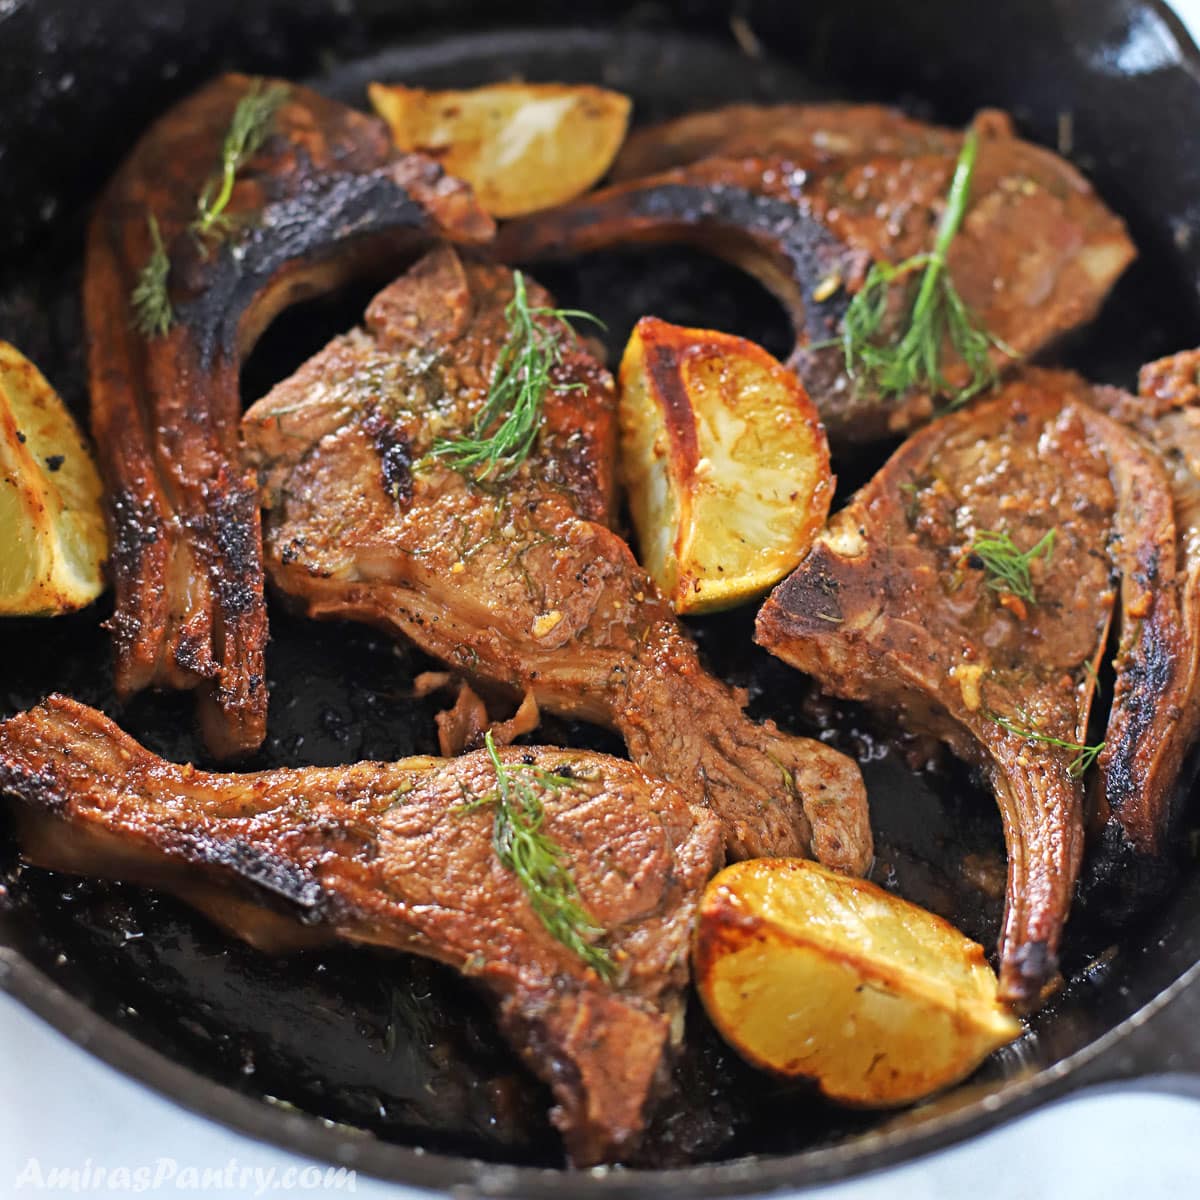 lamb chops on a cast iron skillet decorated with fresh dill and lemon wedges. Marinated Lamb Chops (Classic Middle Eastern Marinade) Marinated Lamb Chops (Classic Middle Eastern Marinade) lamb chops recipe I